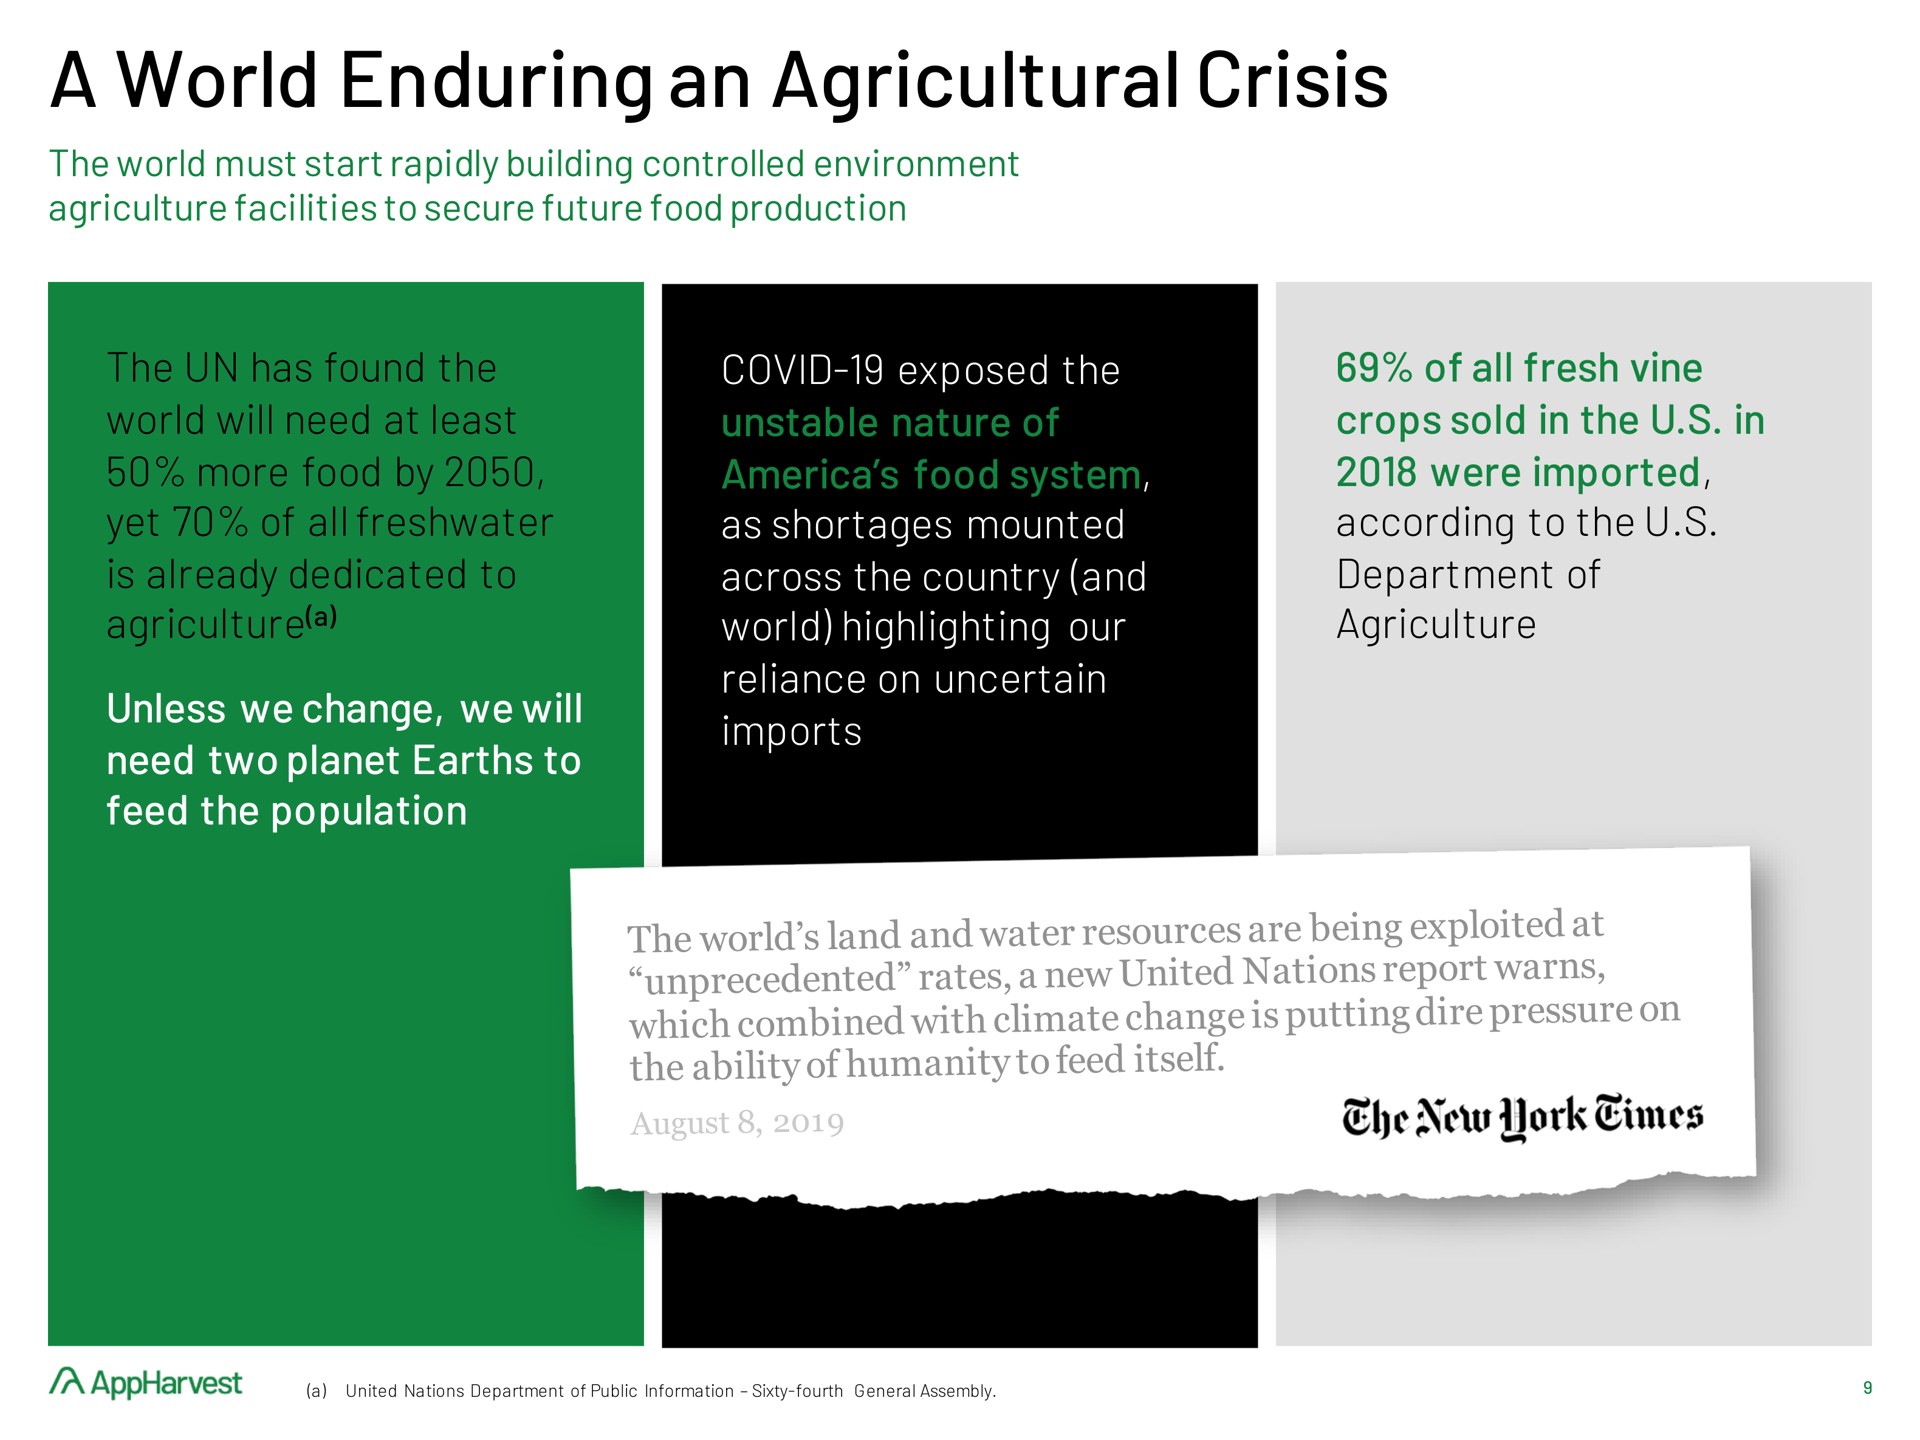 a world enduring an agricultural crisis | AppHarvest